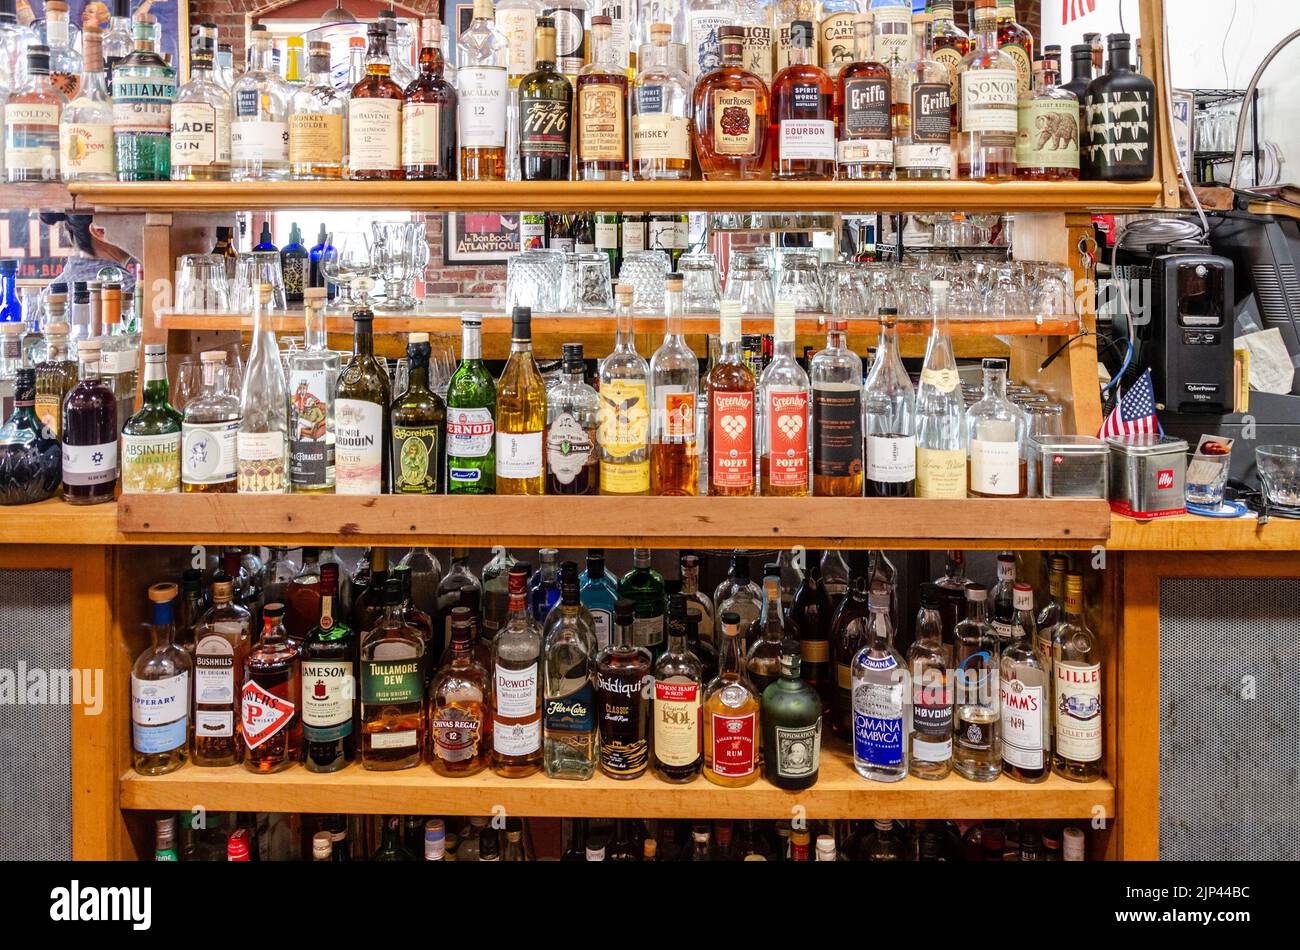 Bottles of liquor and alcoholic drinks at a bar in California, USA Stock Photo